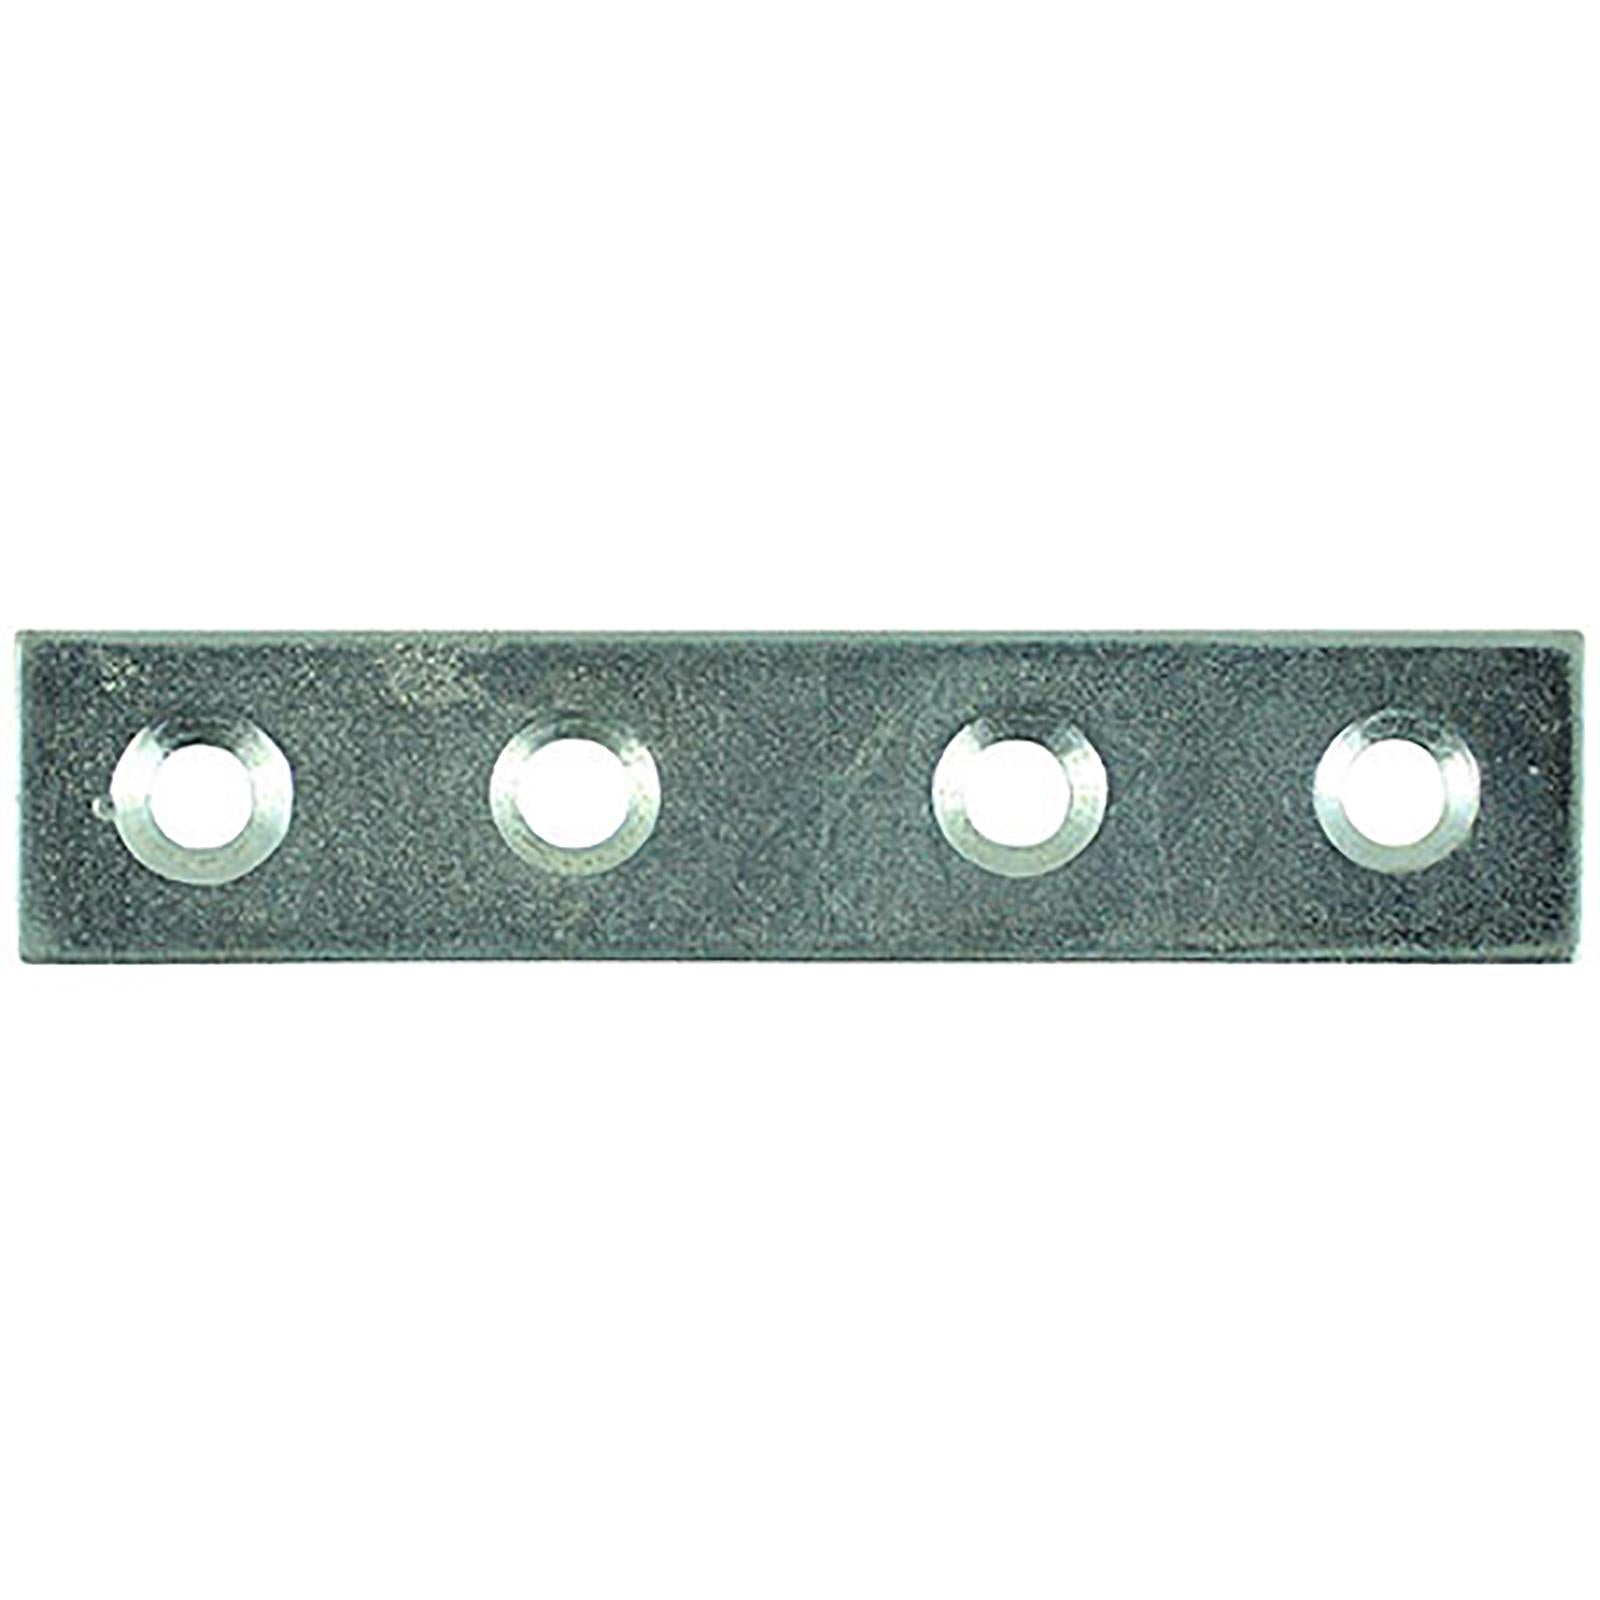 TIMCO Mending Plate Straight Zinc Plated Steel Countersunk Holes